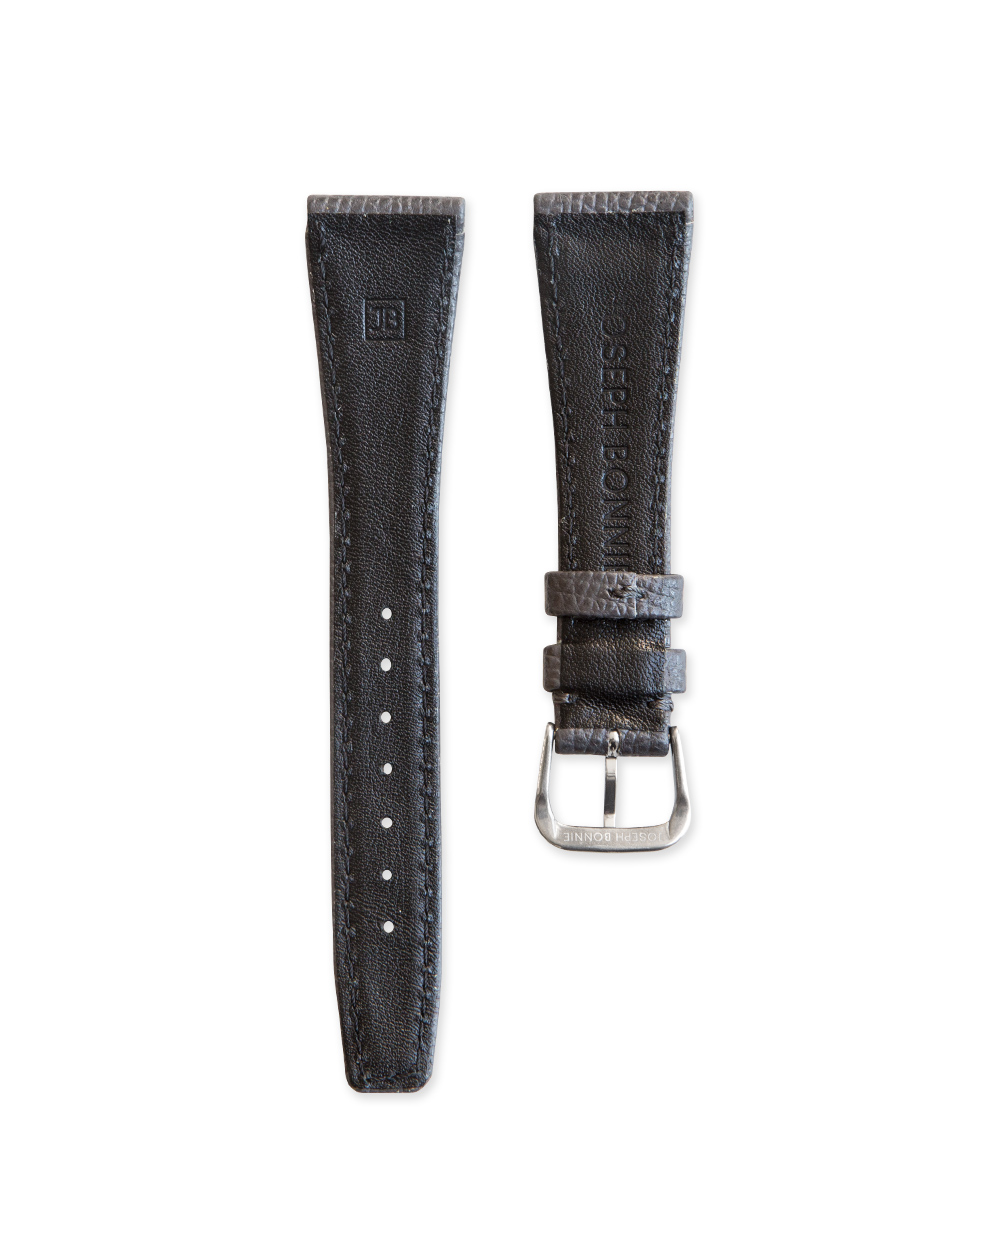 SERICA Watch Straps 1953 Charcoal